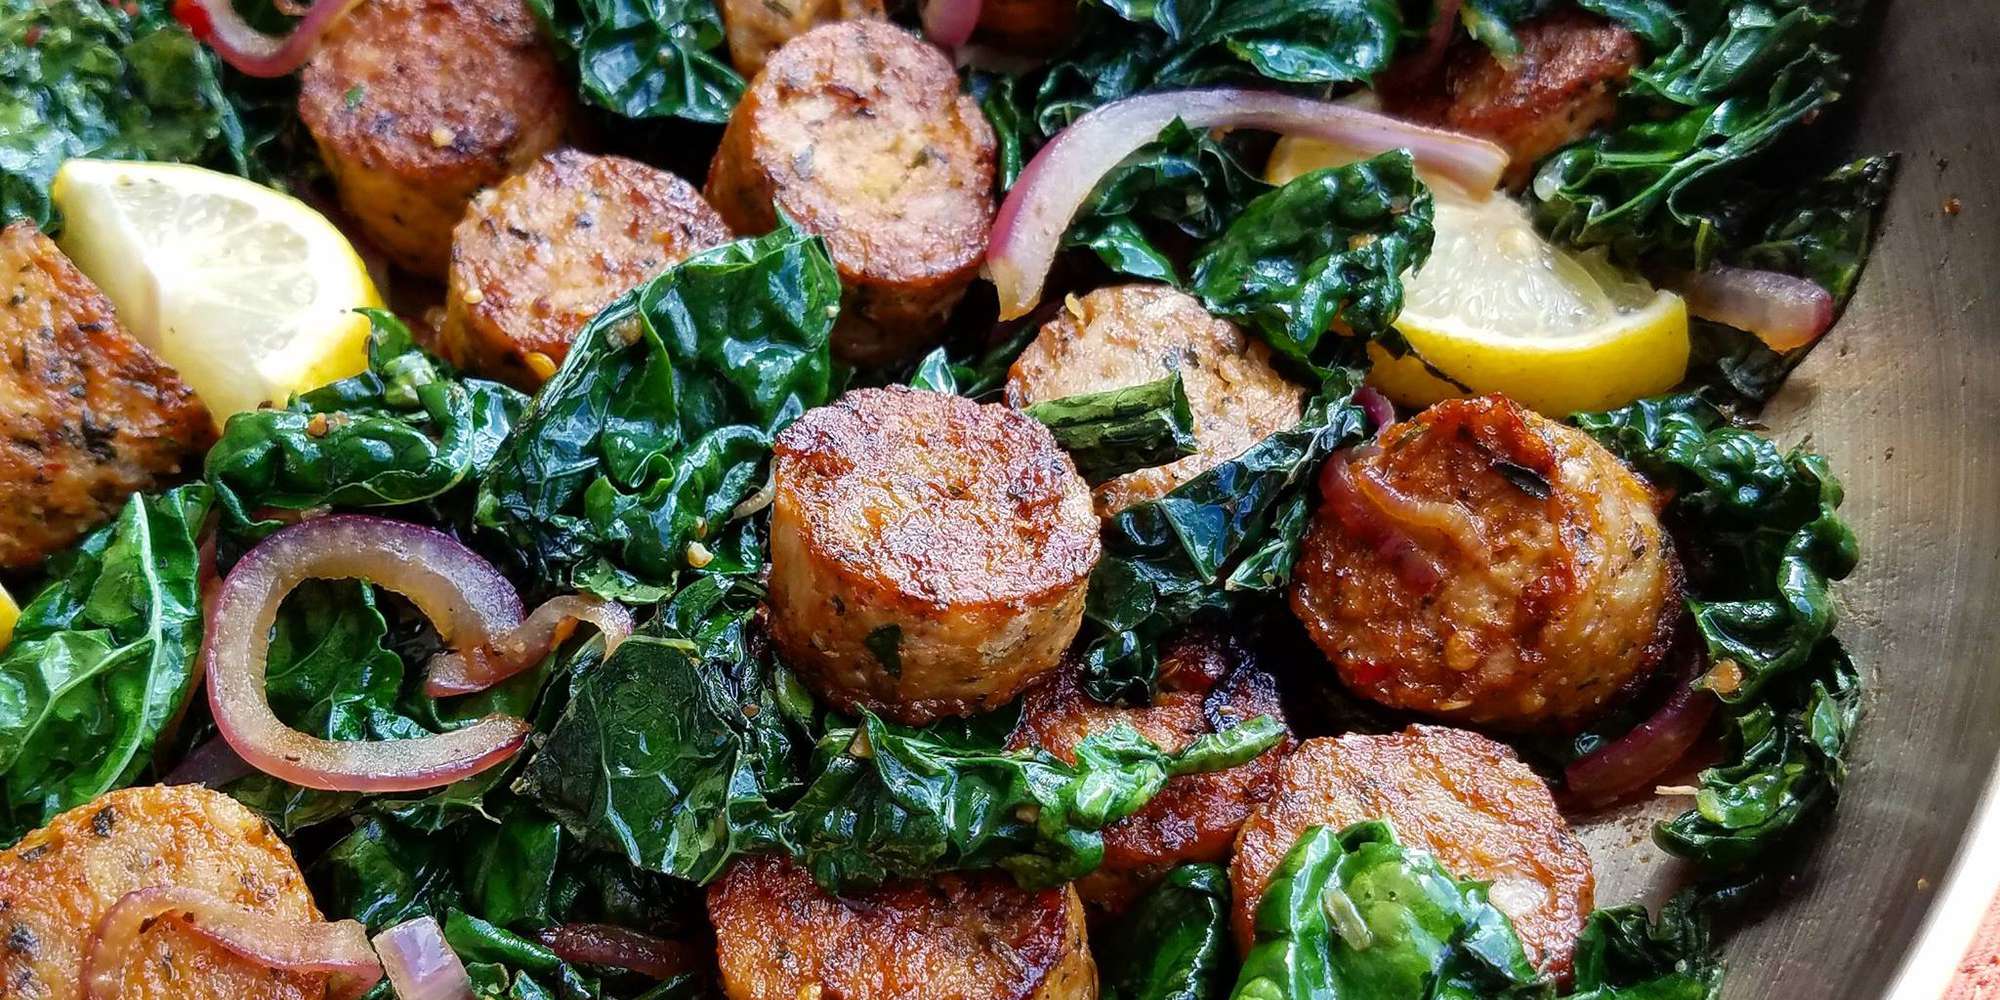 TNT Sausage with Feta and Spinach